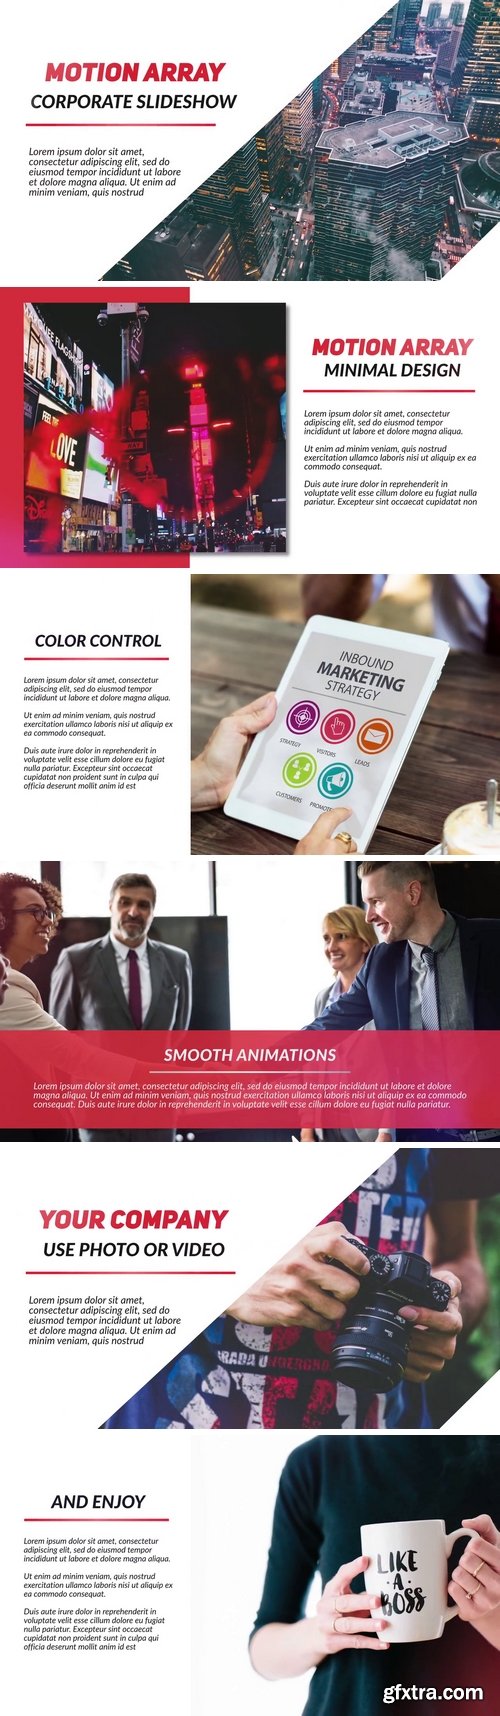 MA - Corporate Slideshow After Effects Templates 149955